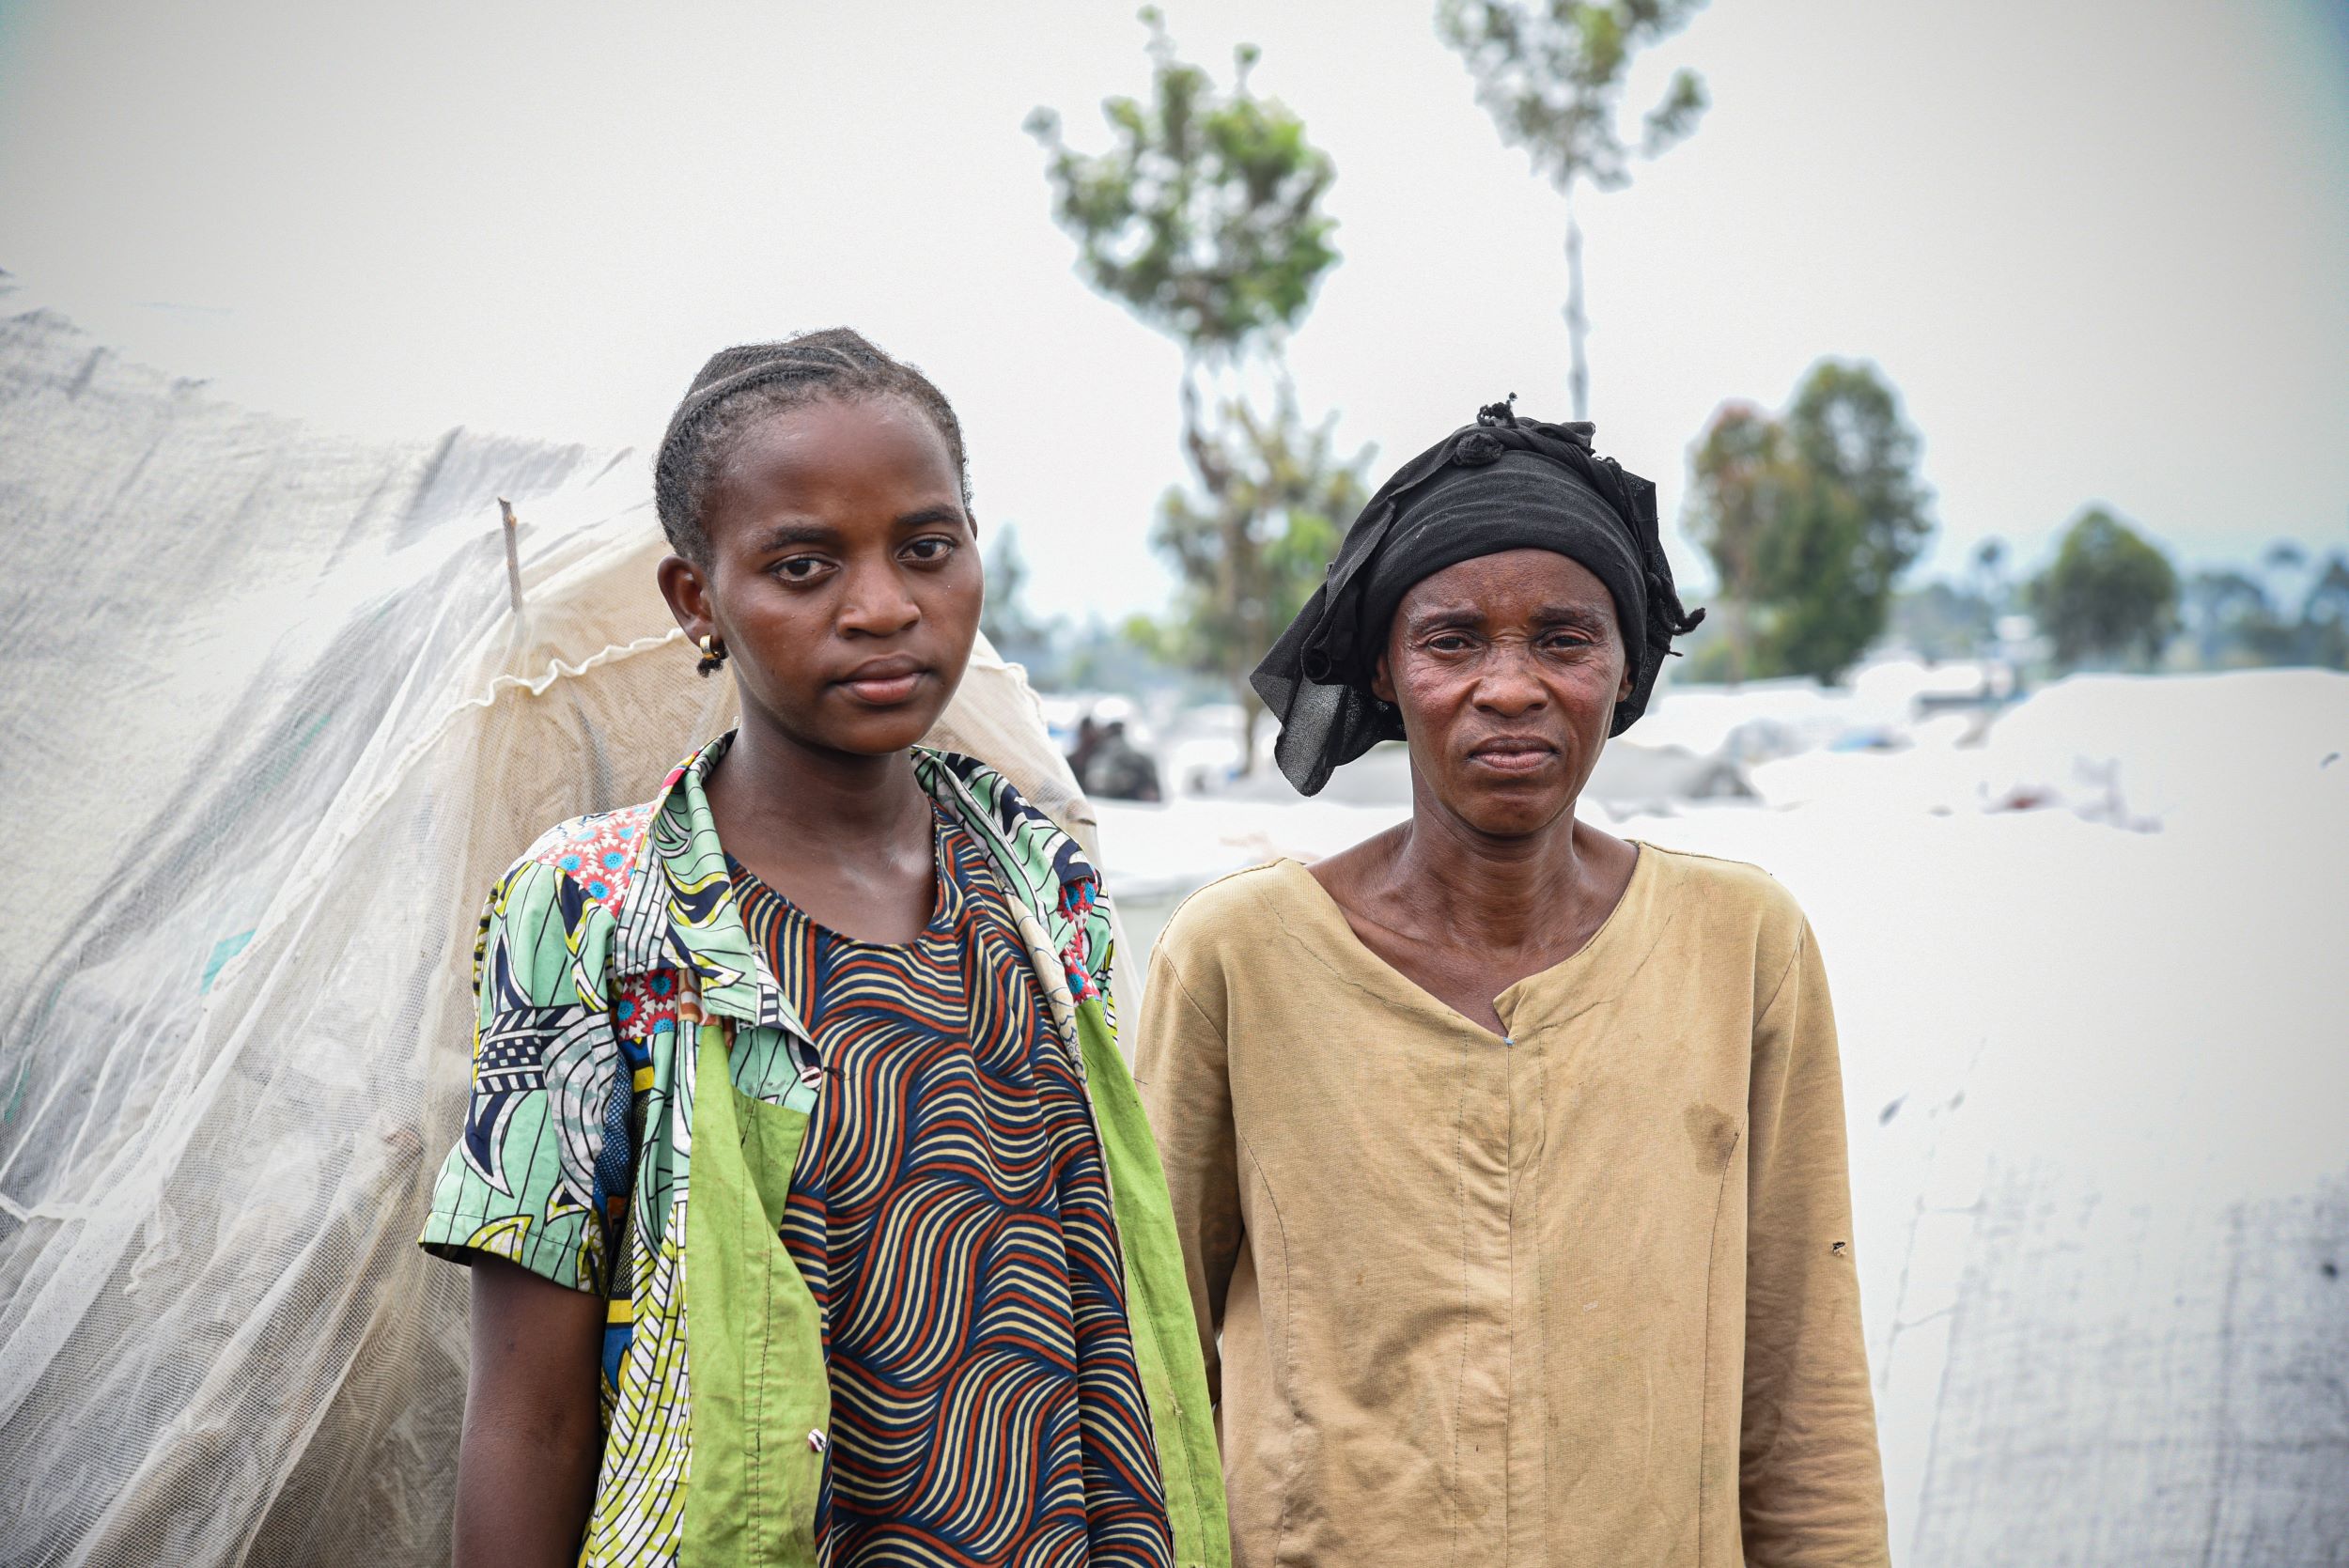  14-year-old internally displaced girl with her mother from the DRC